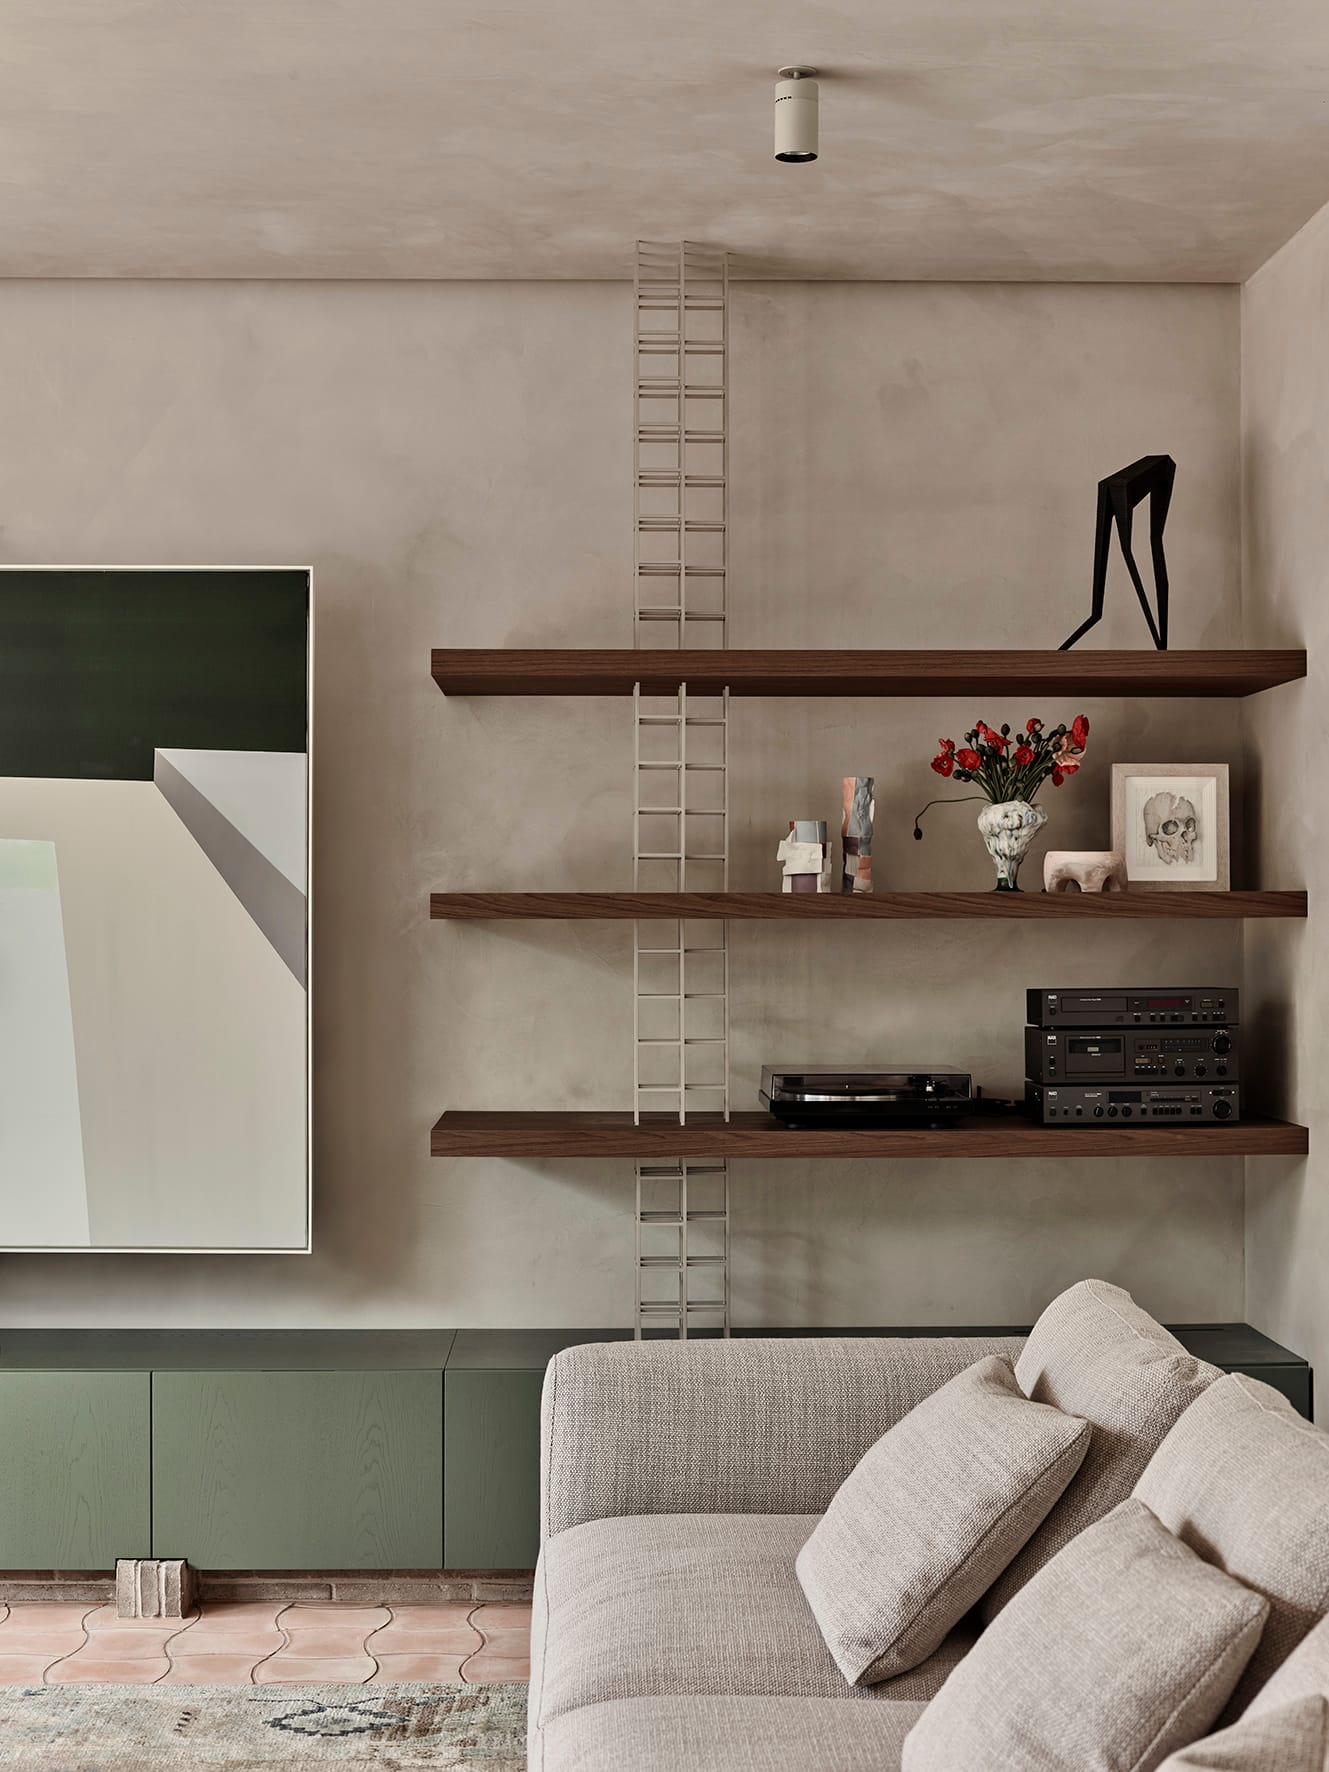 Terra Firma by RobsonRak showing a detail shot of the living room with rendered walls and timber shelves